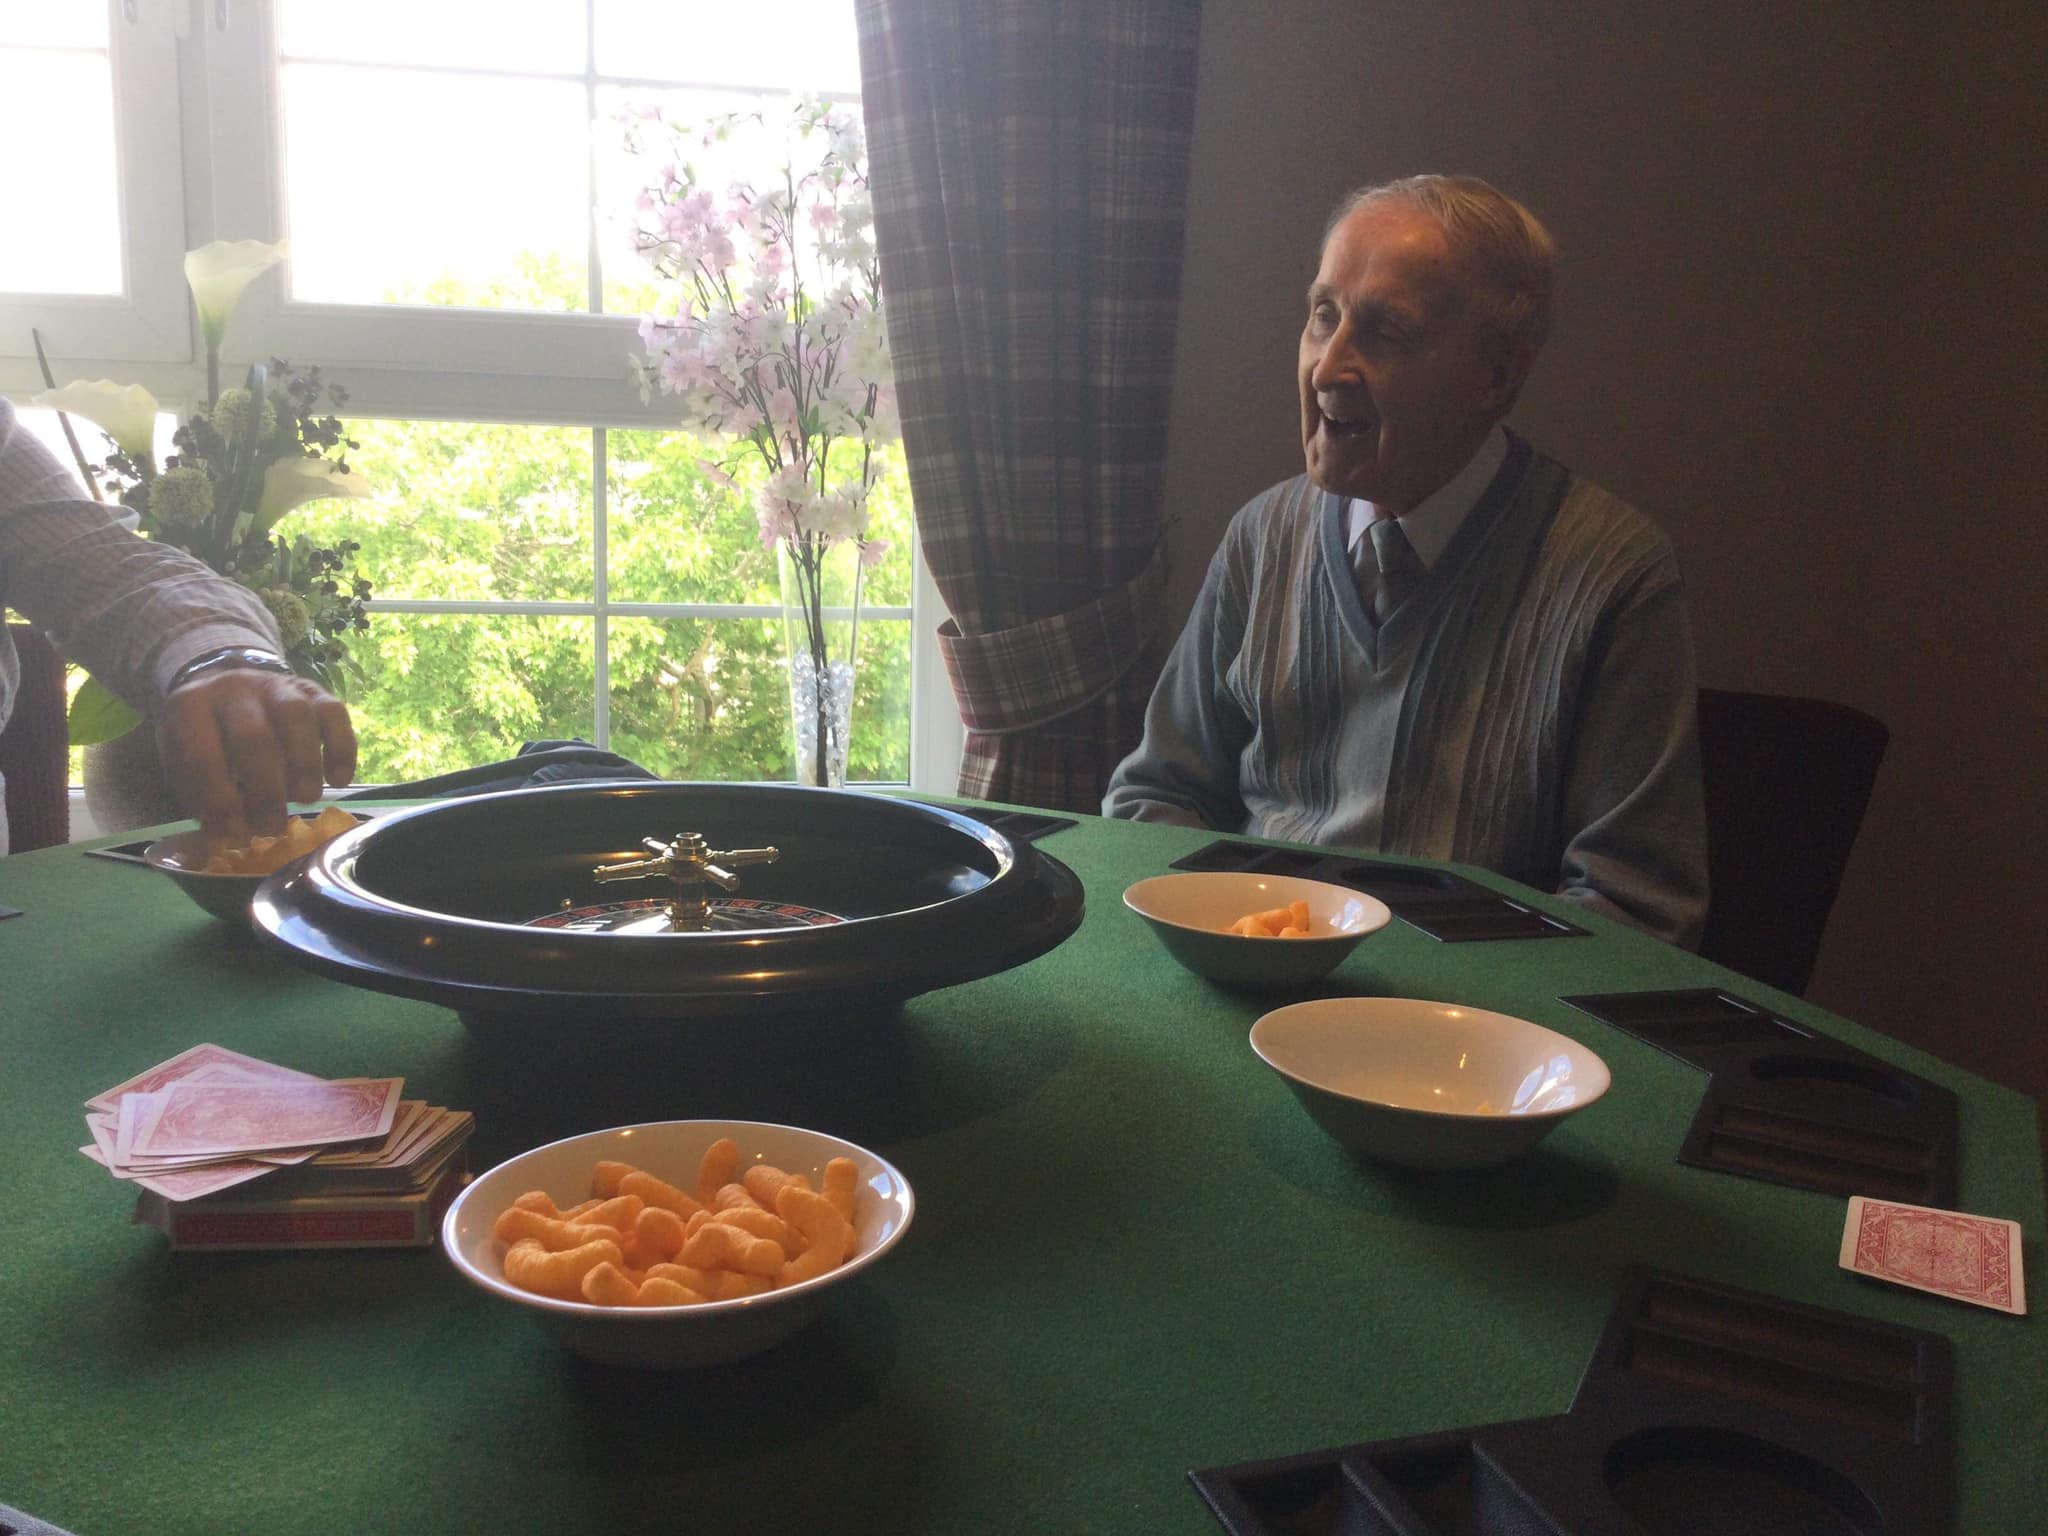 Male Residents Playing Casino Games with Snacks